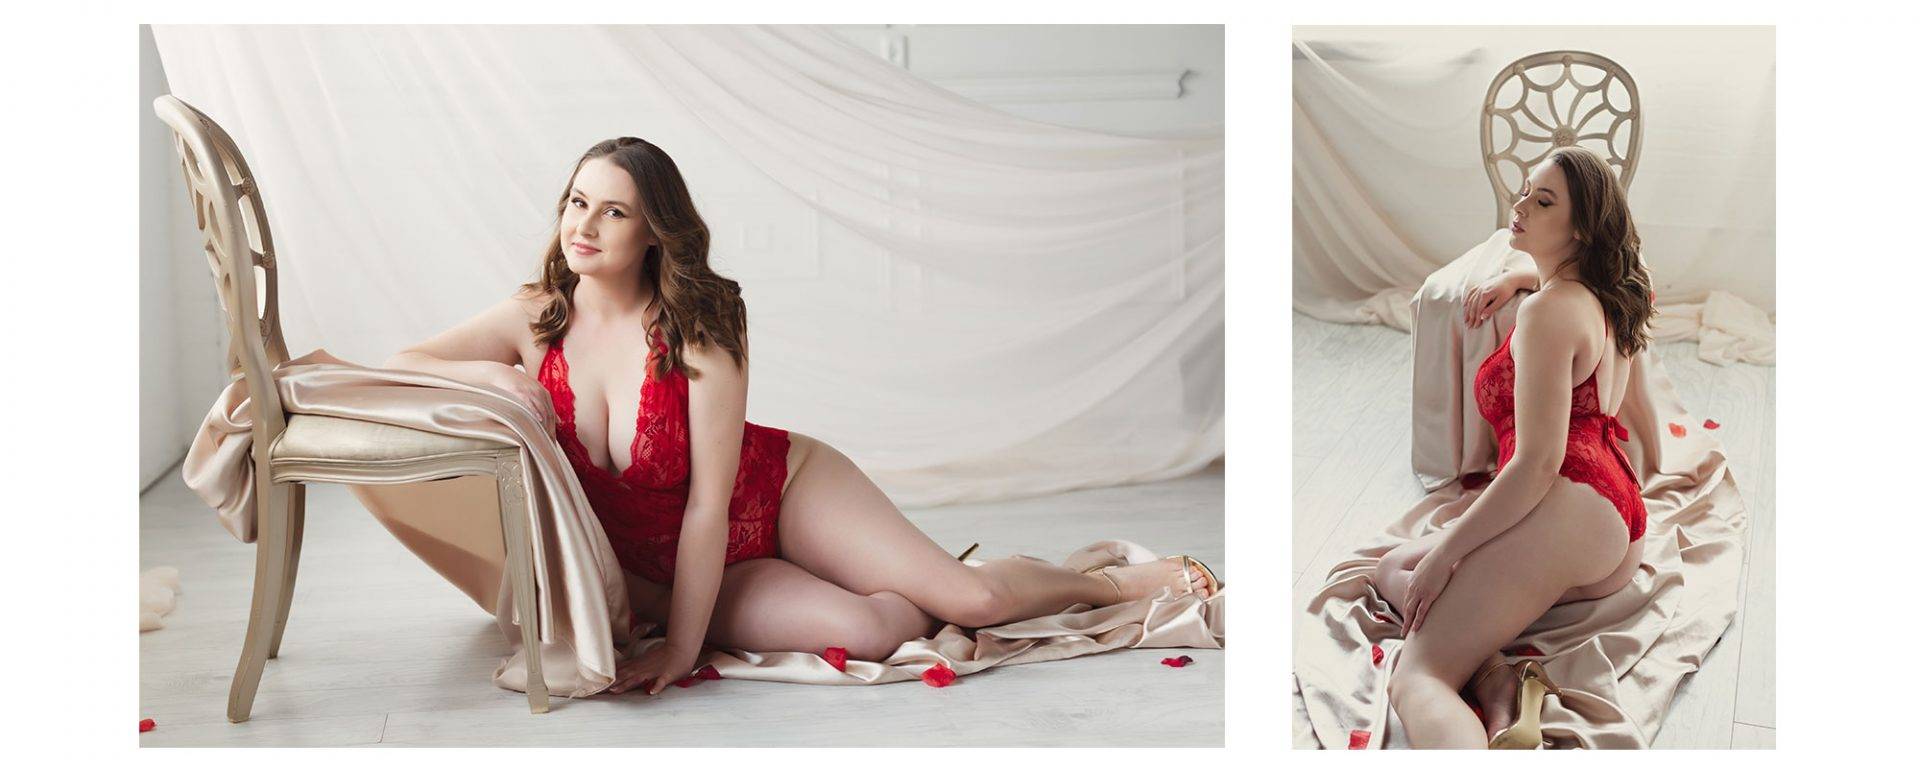 Boudoir photos in red outfit